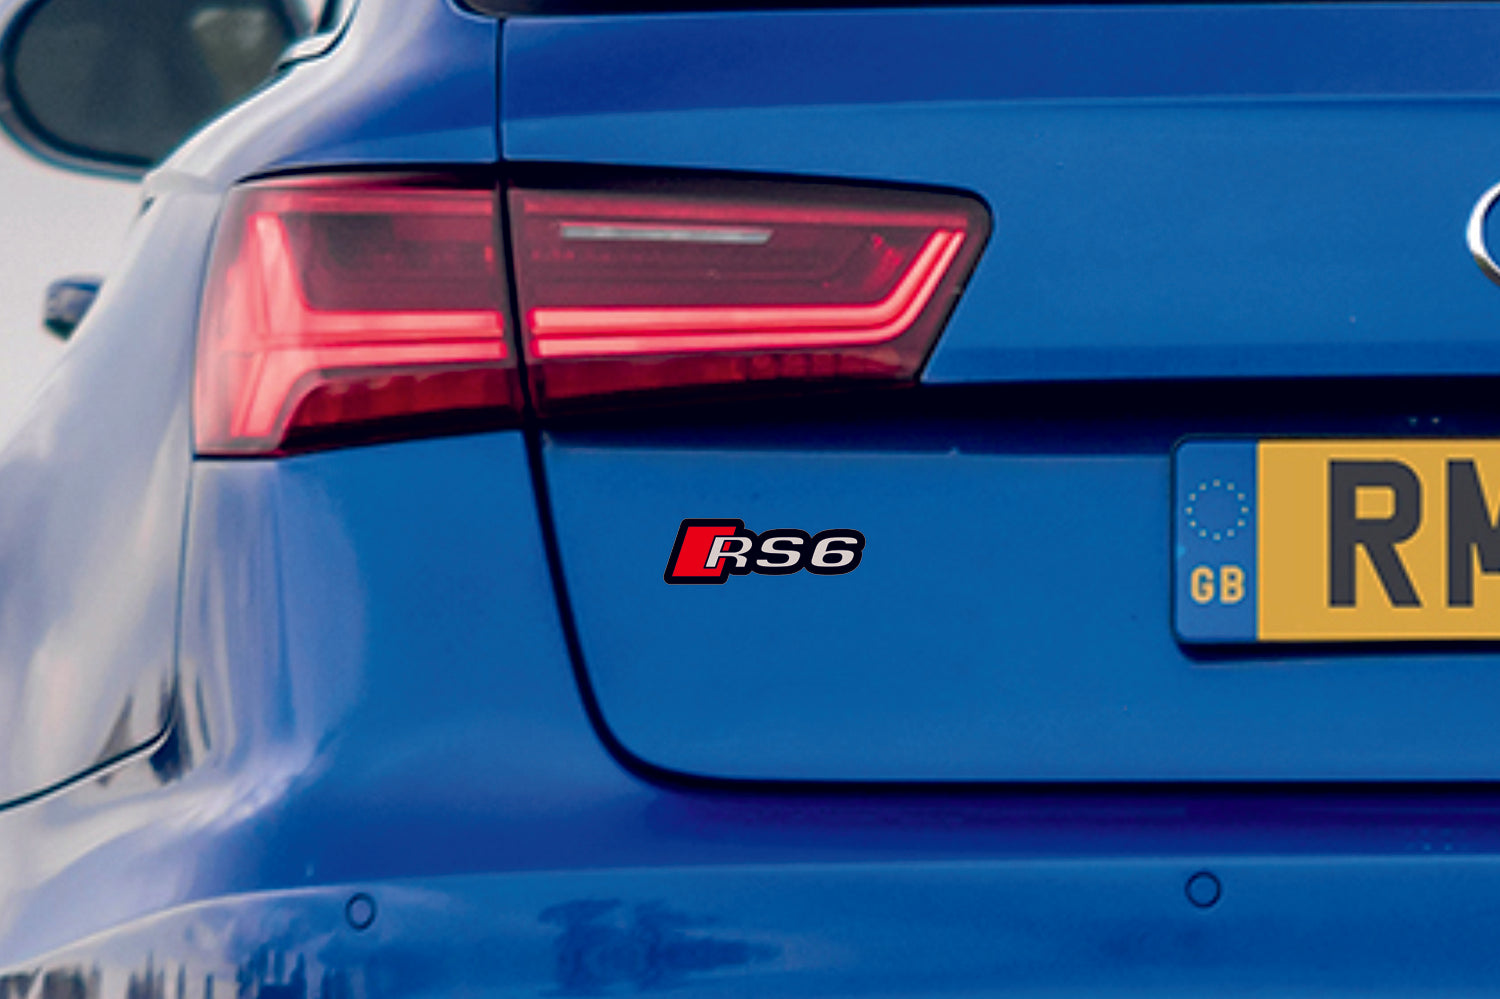 Audi RS6 tailgate trunk rear emblem with RS6 logo - decoinfabric